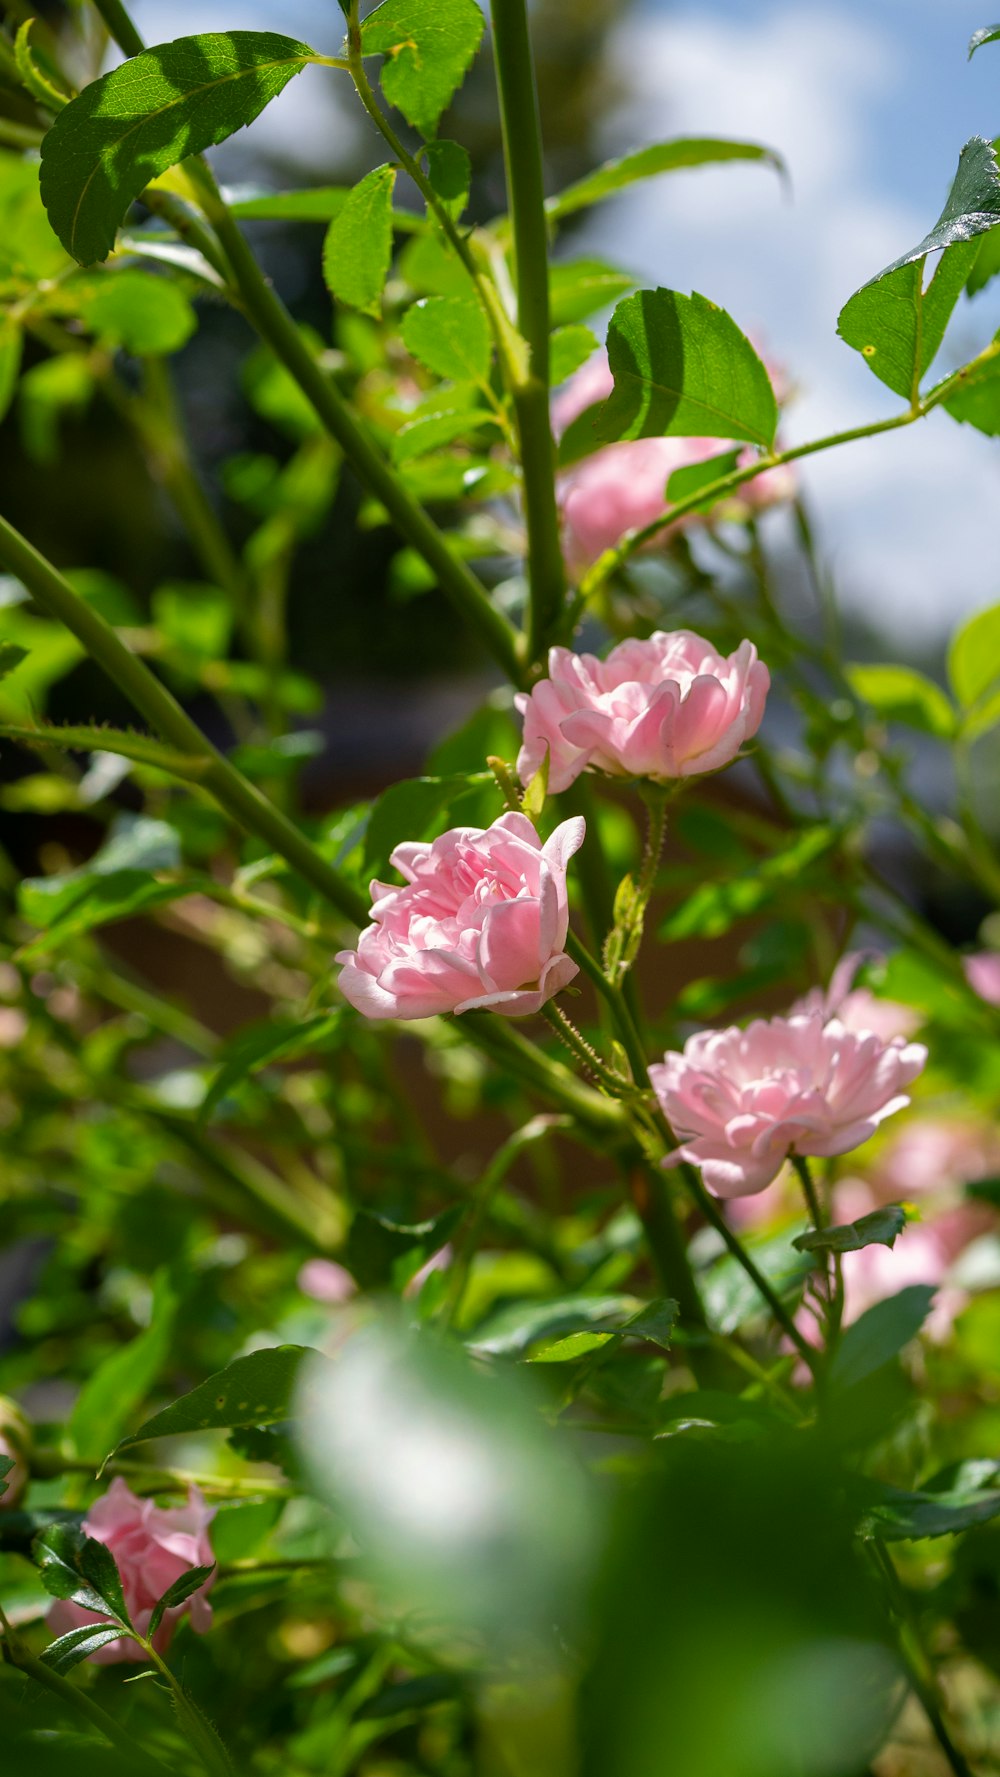 pink flowers blooming in a garden on a sunny day